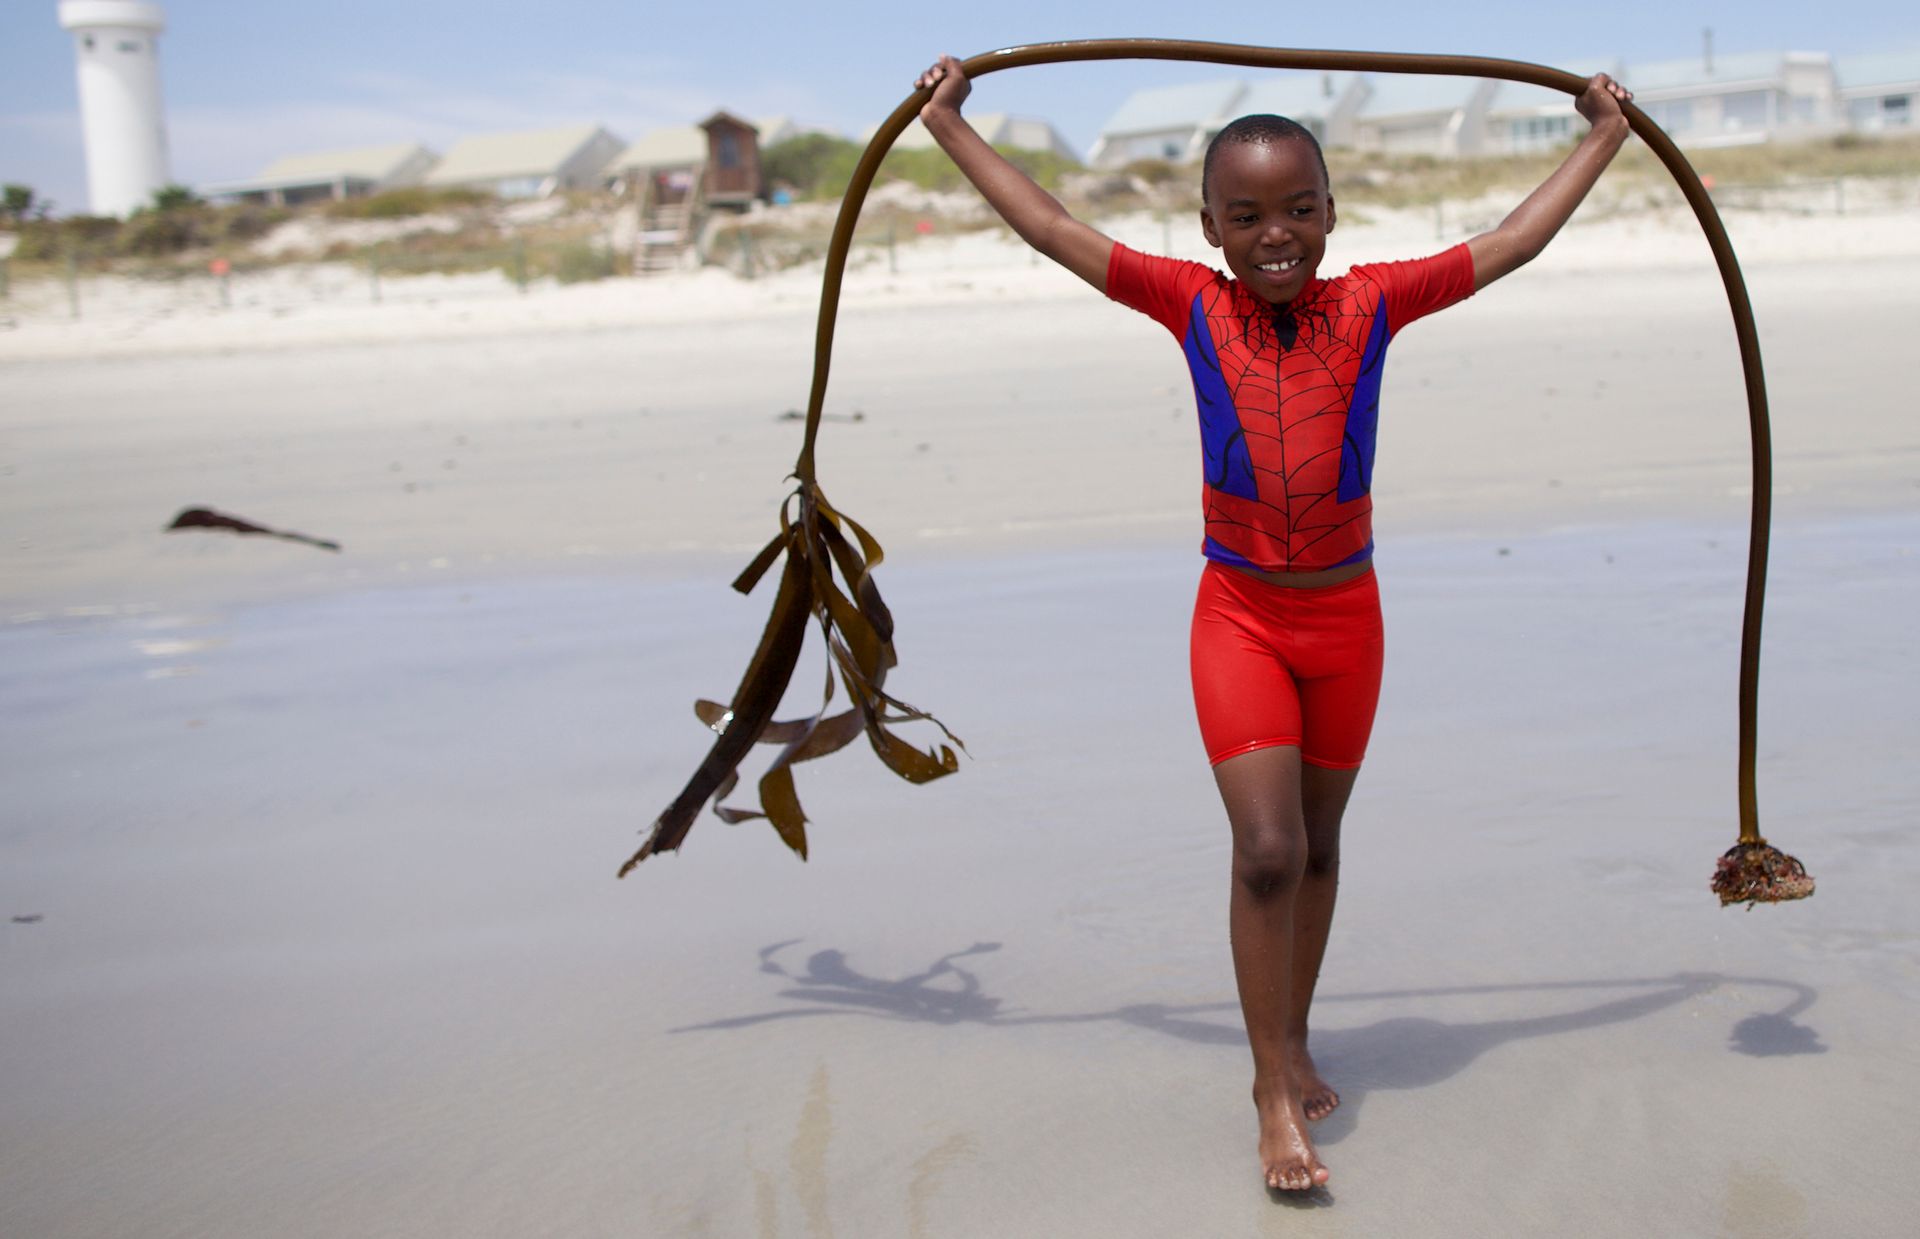 Tendai hoists a strand of kelp during a family trip to the beach. Tendai recently turned eight years old and was excited to be baptized and confirmed a member of the Church.